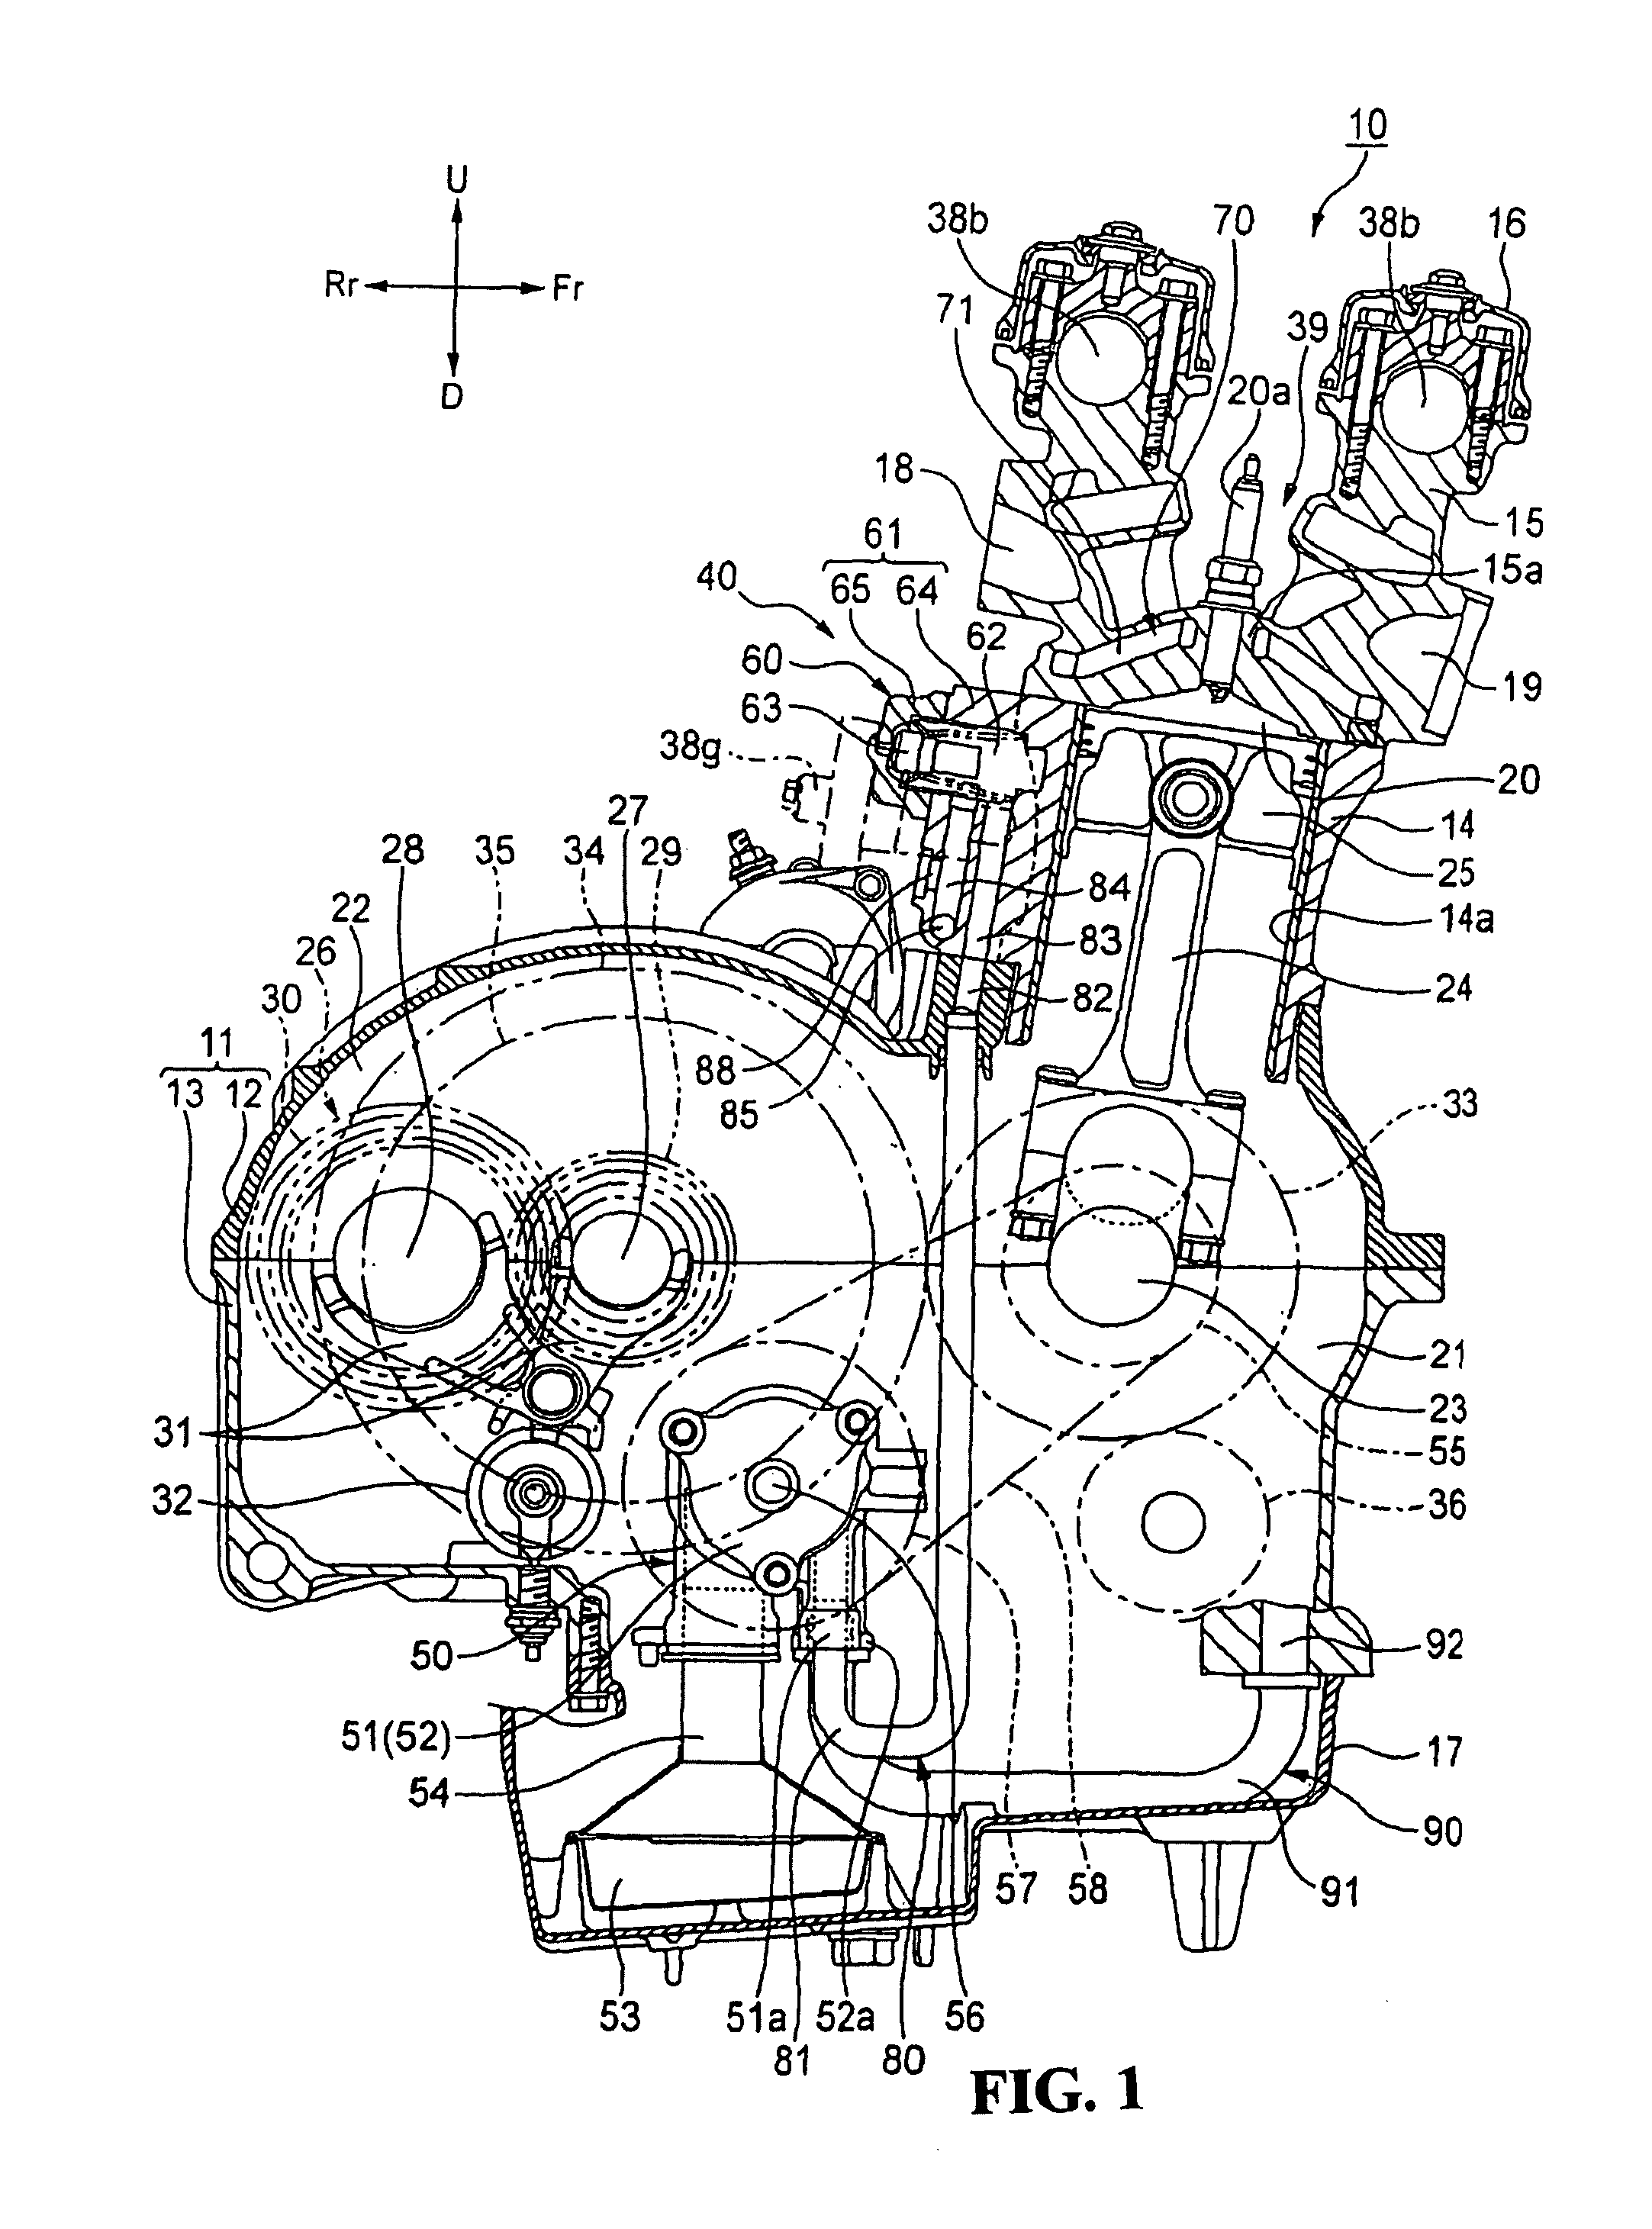 Cooling system of internal combustion engine